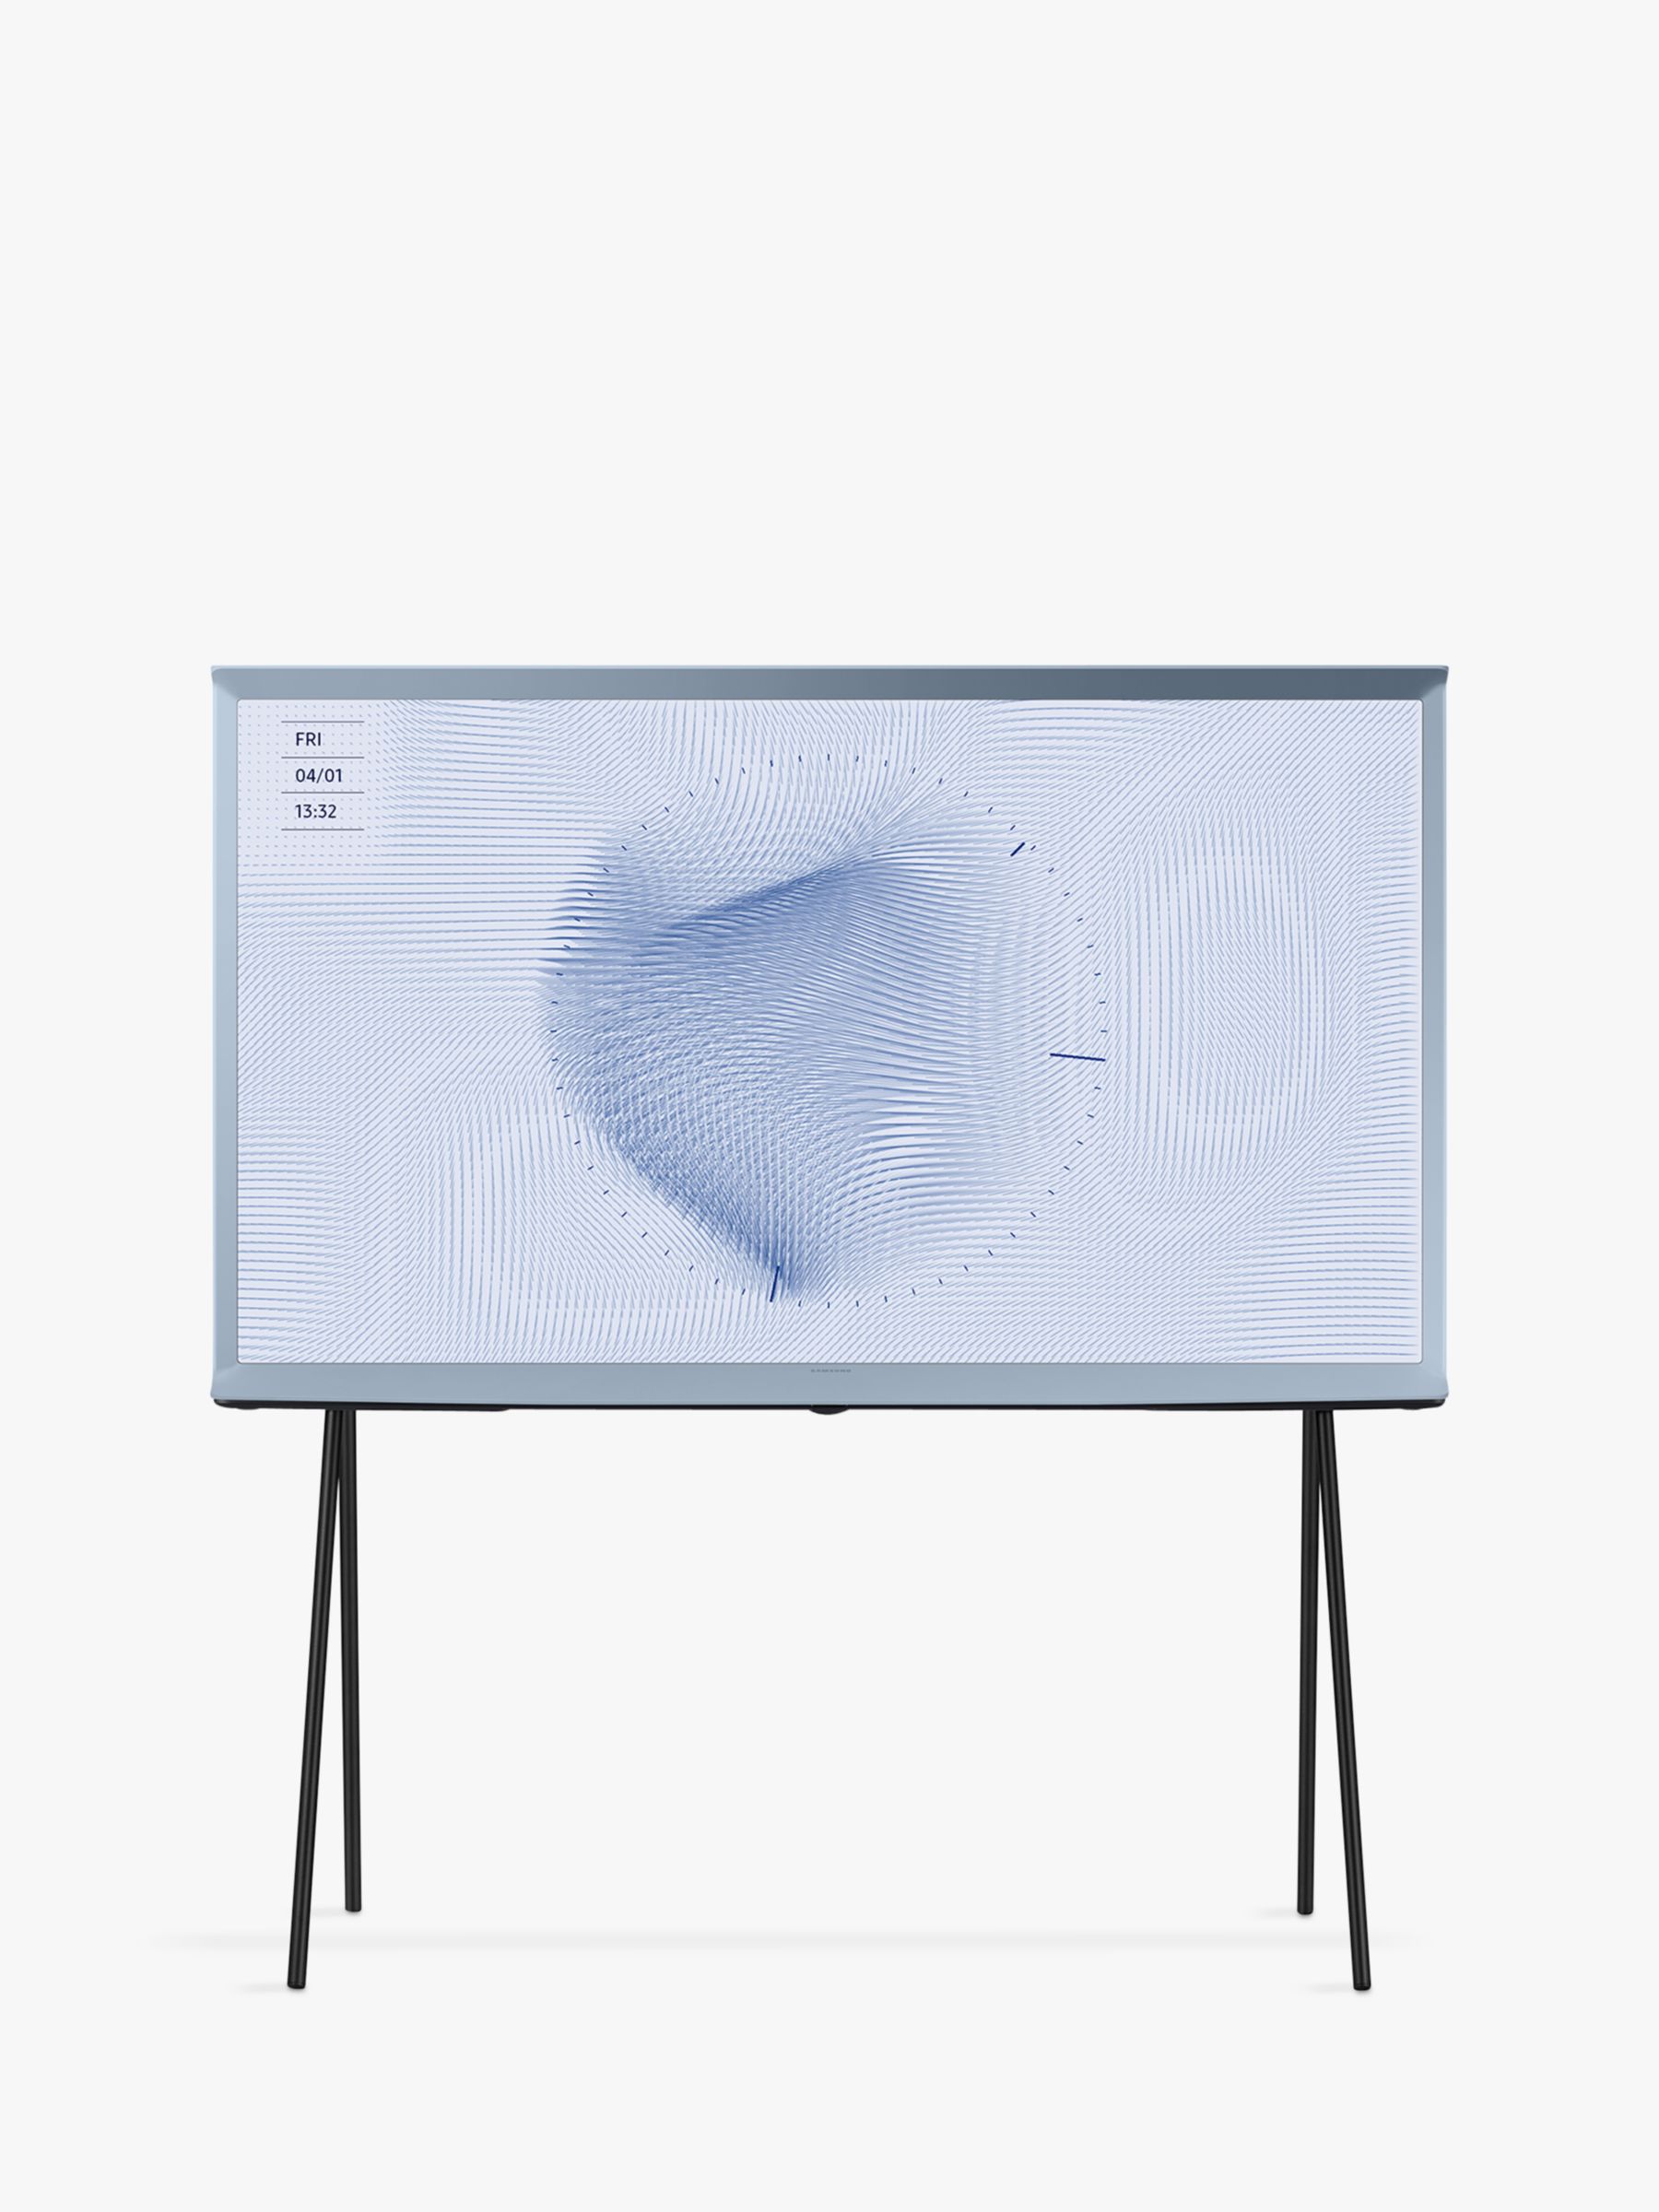 Samsung The Serif (2022) QLED HDR 4K Ultra HD Smart TV, 65 inch with TVPlus & Bouroullec Brothers Design